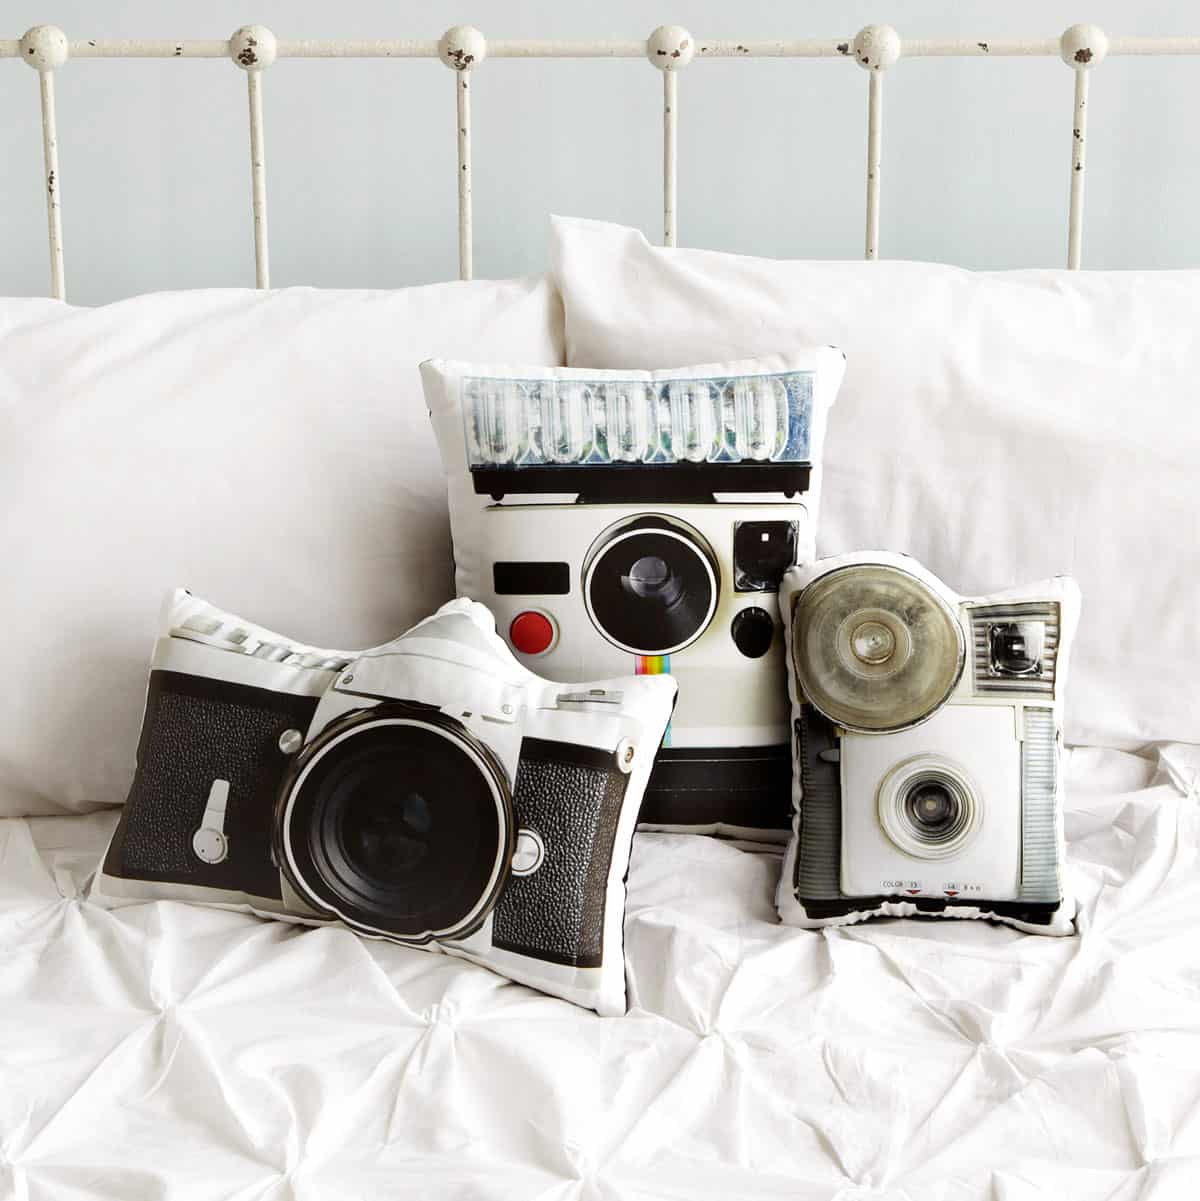 In the seem Vintage Camera Pillows Buy Cute Photographer Stuff